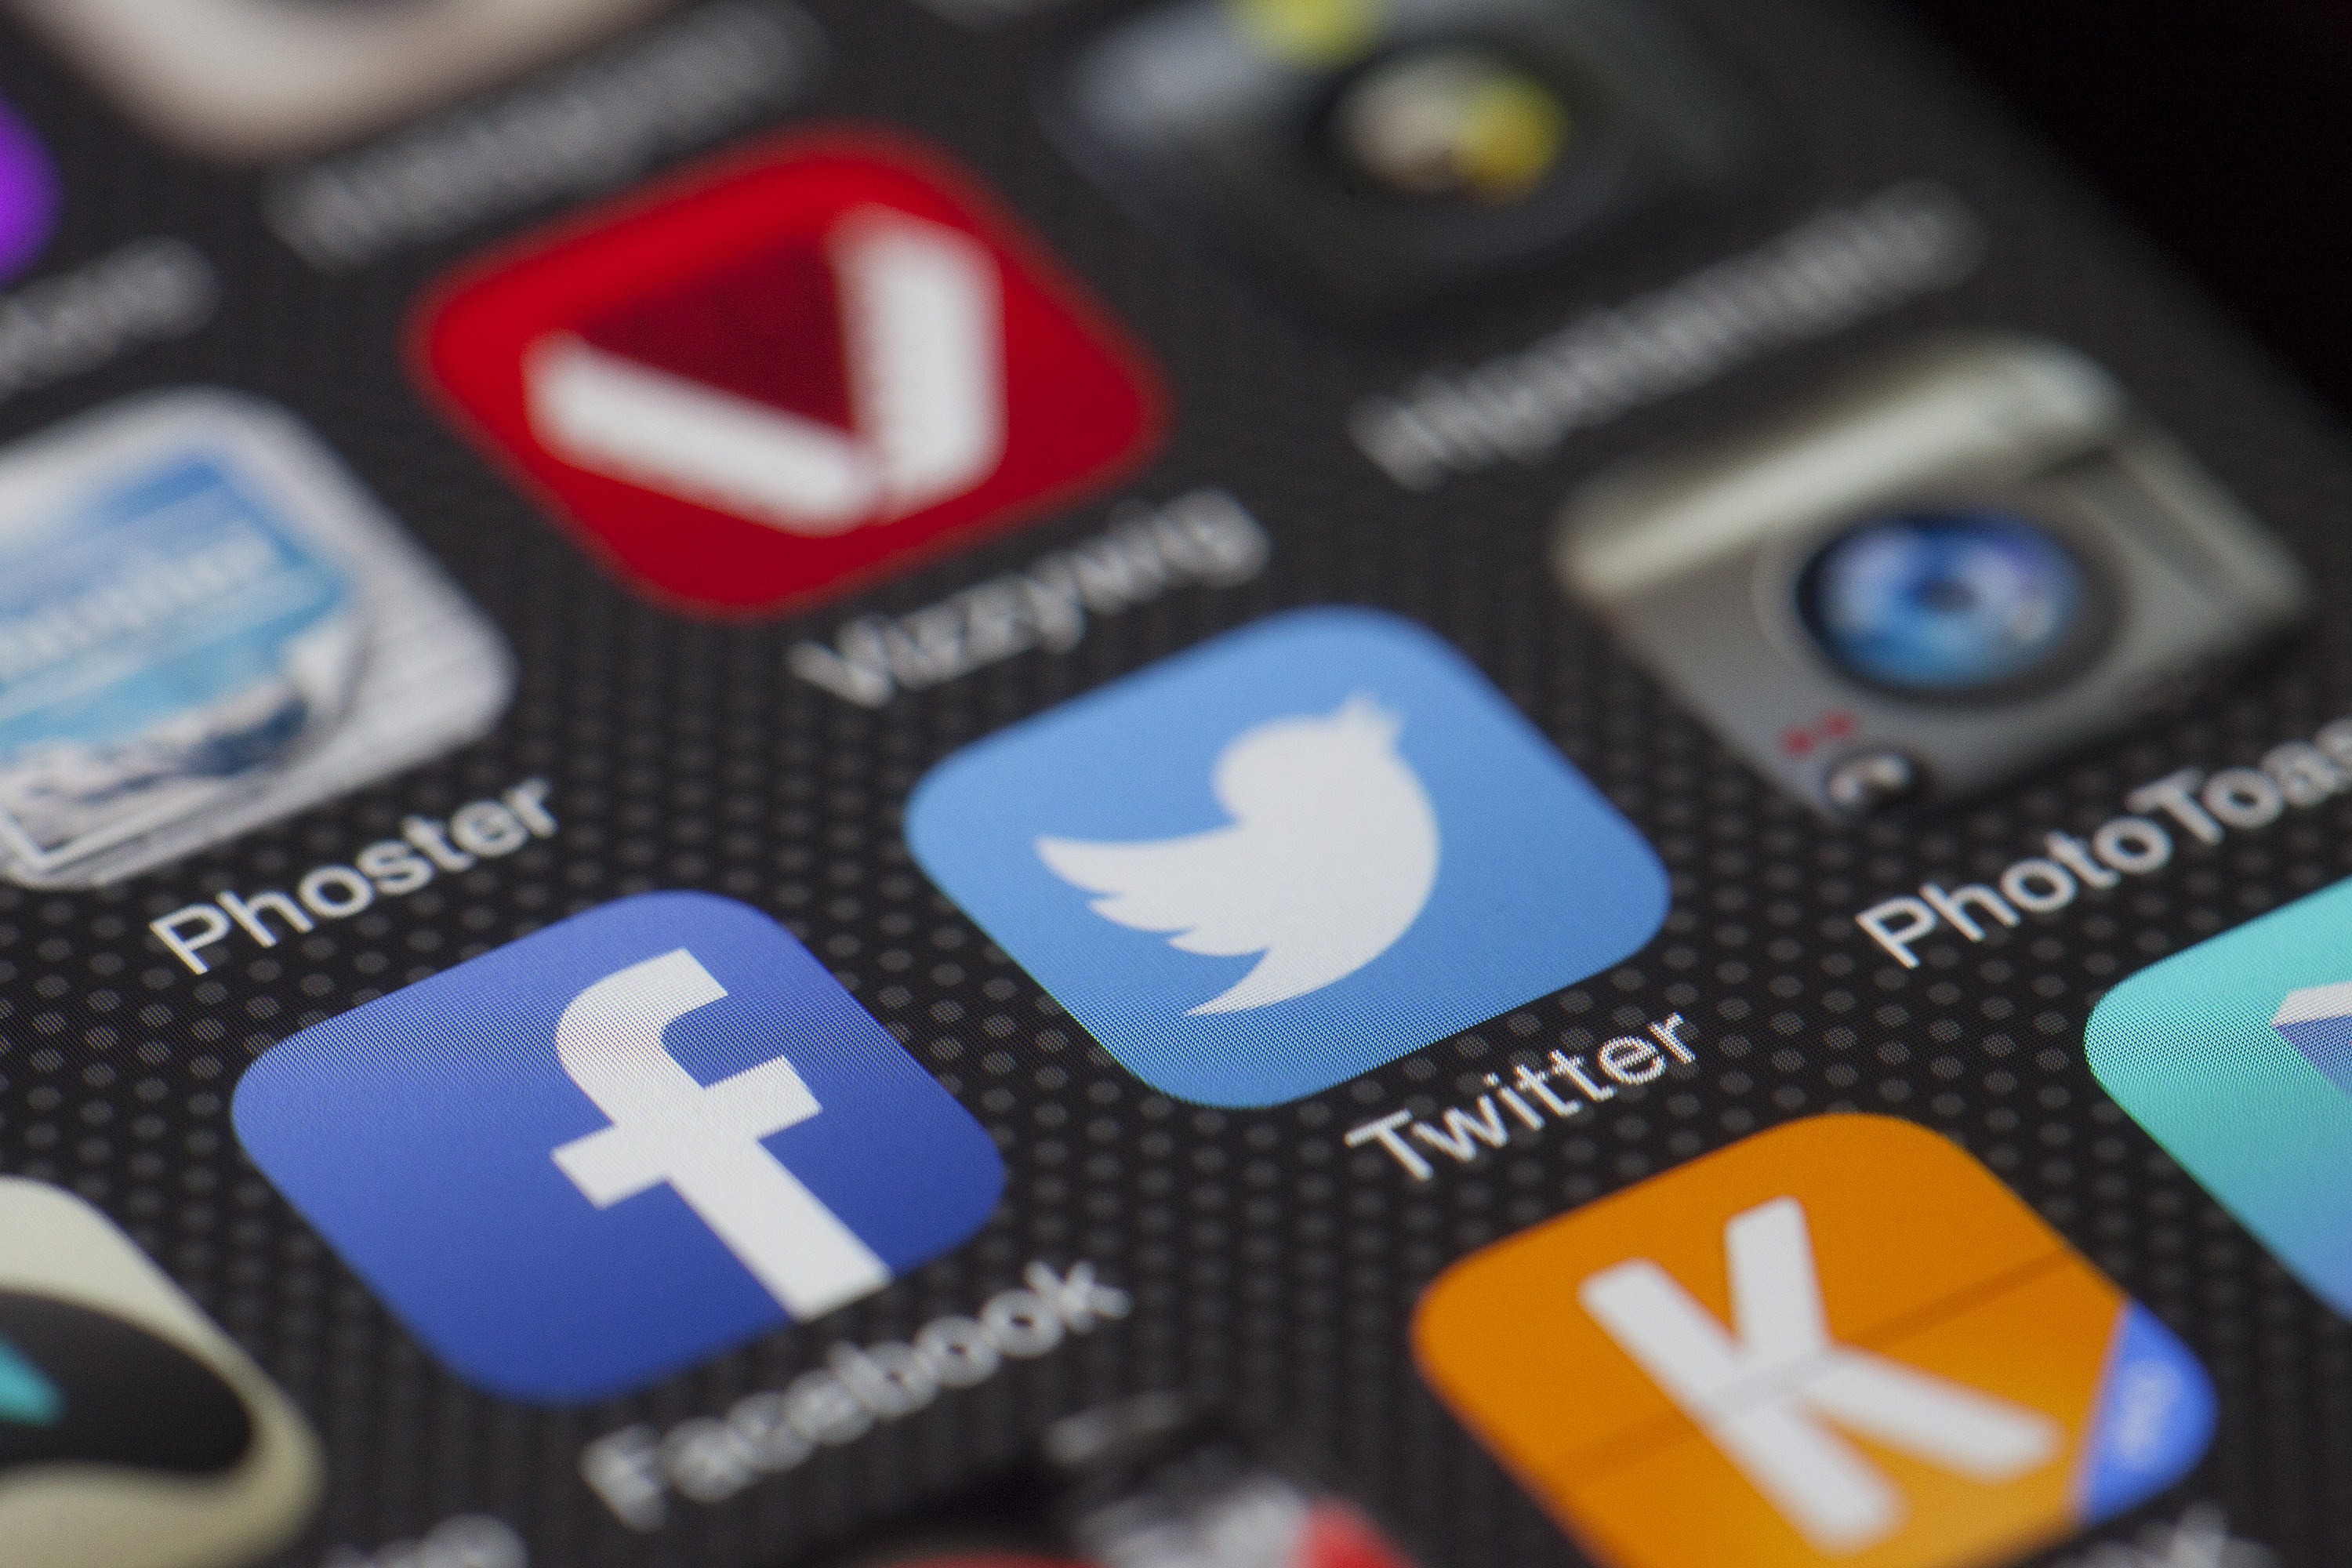 Image of a zoomed-in smartphone screen with blurry social media icons, including Facebook and Twitter.